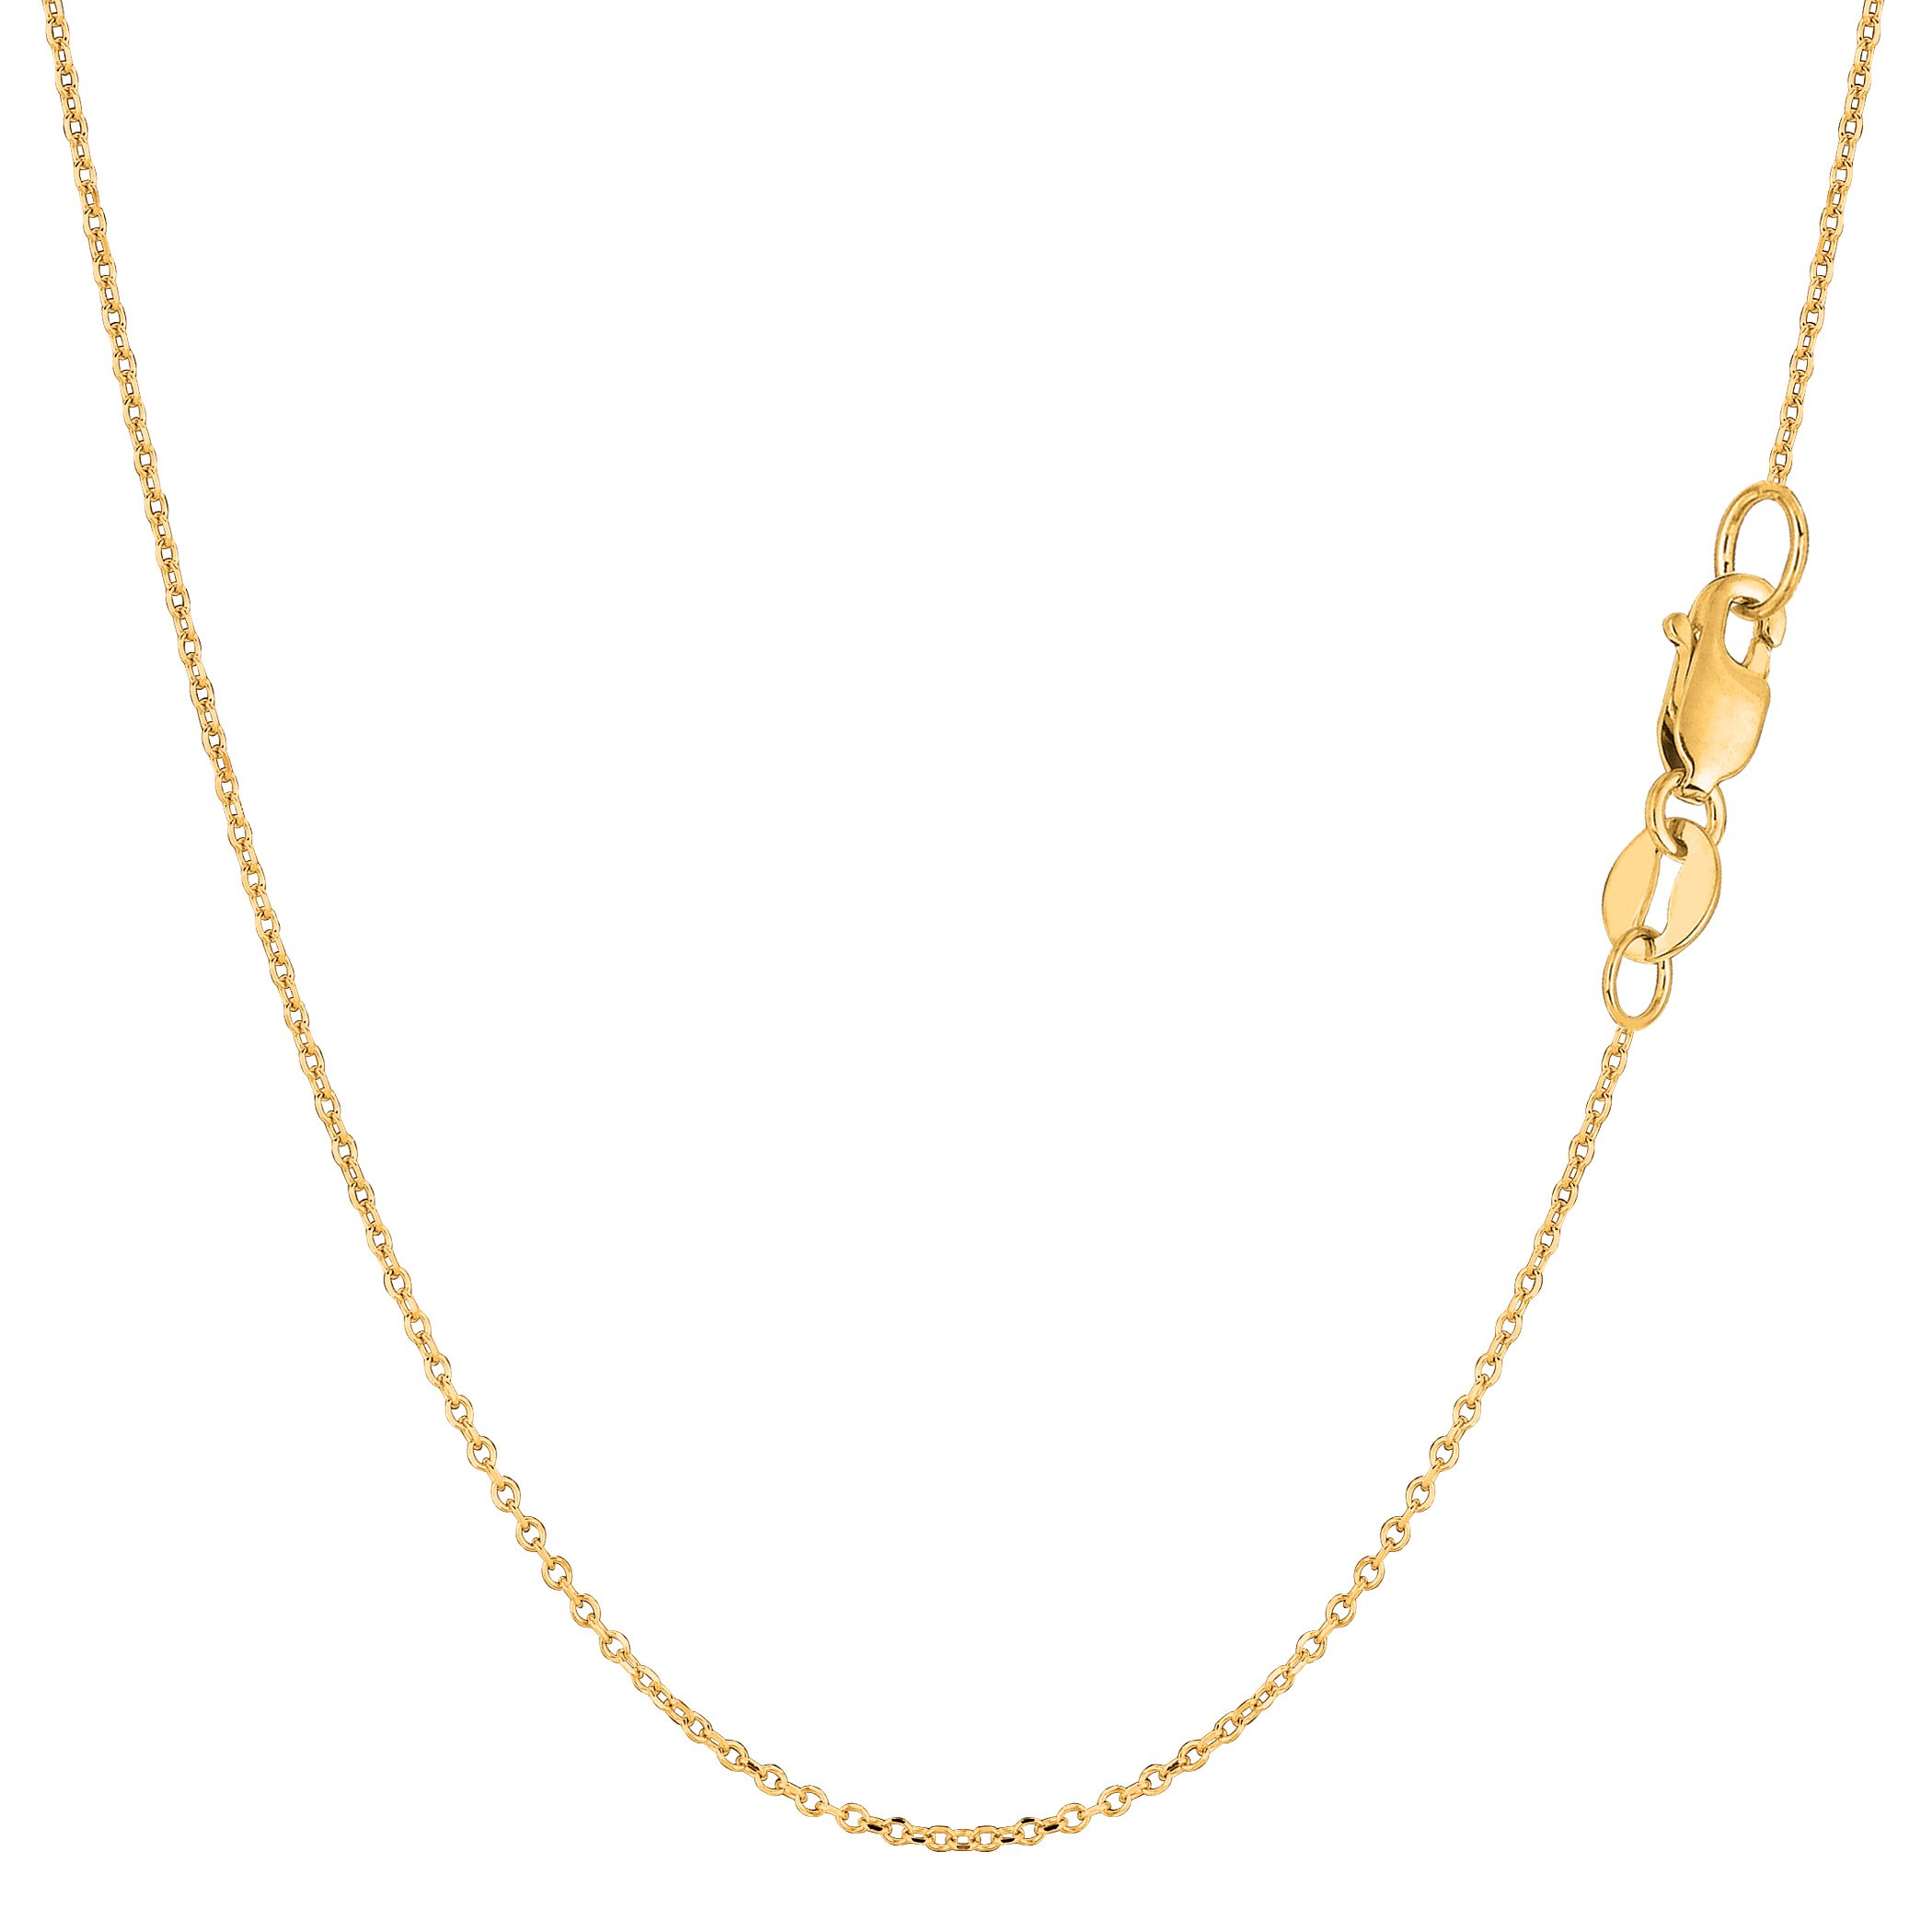 Jewelry Affairs 14k Yellow Gold Cable Link Chain Necklace, 0.8mm